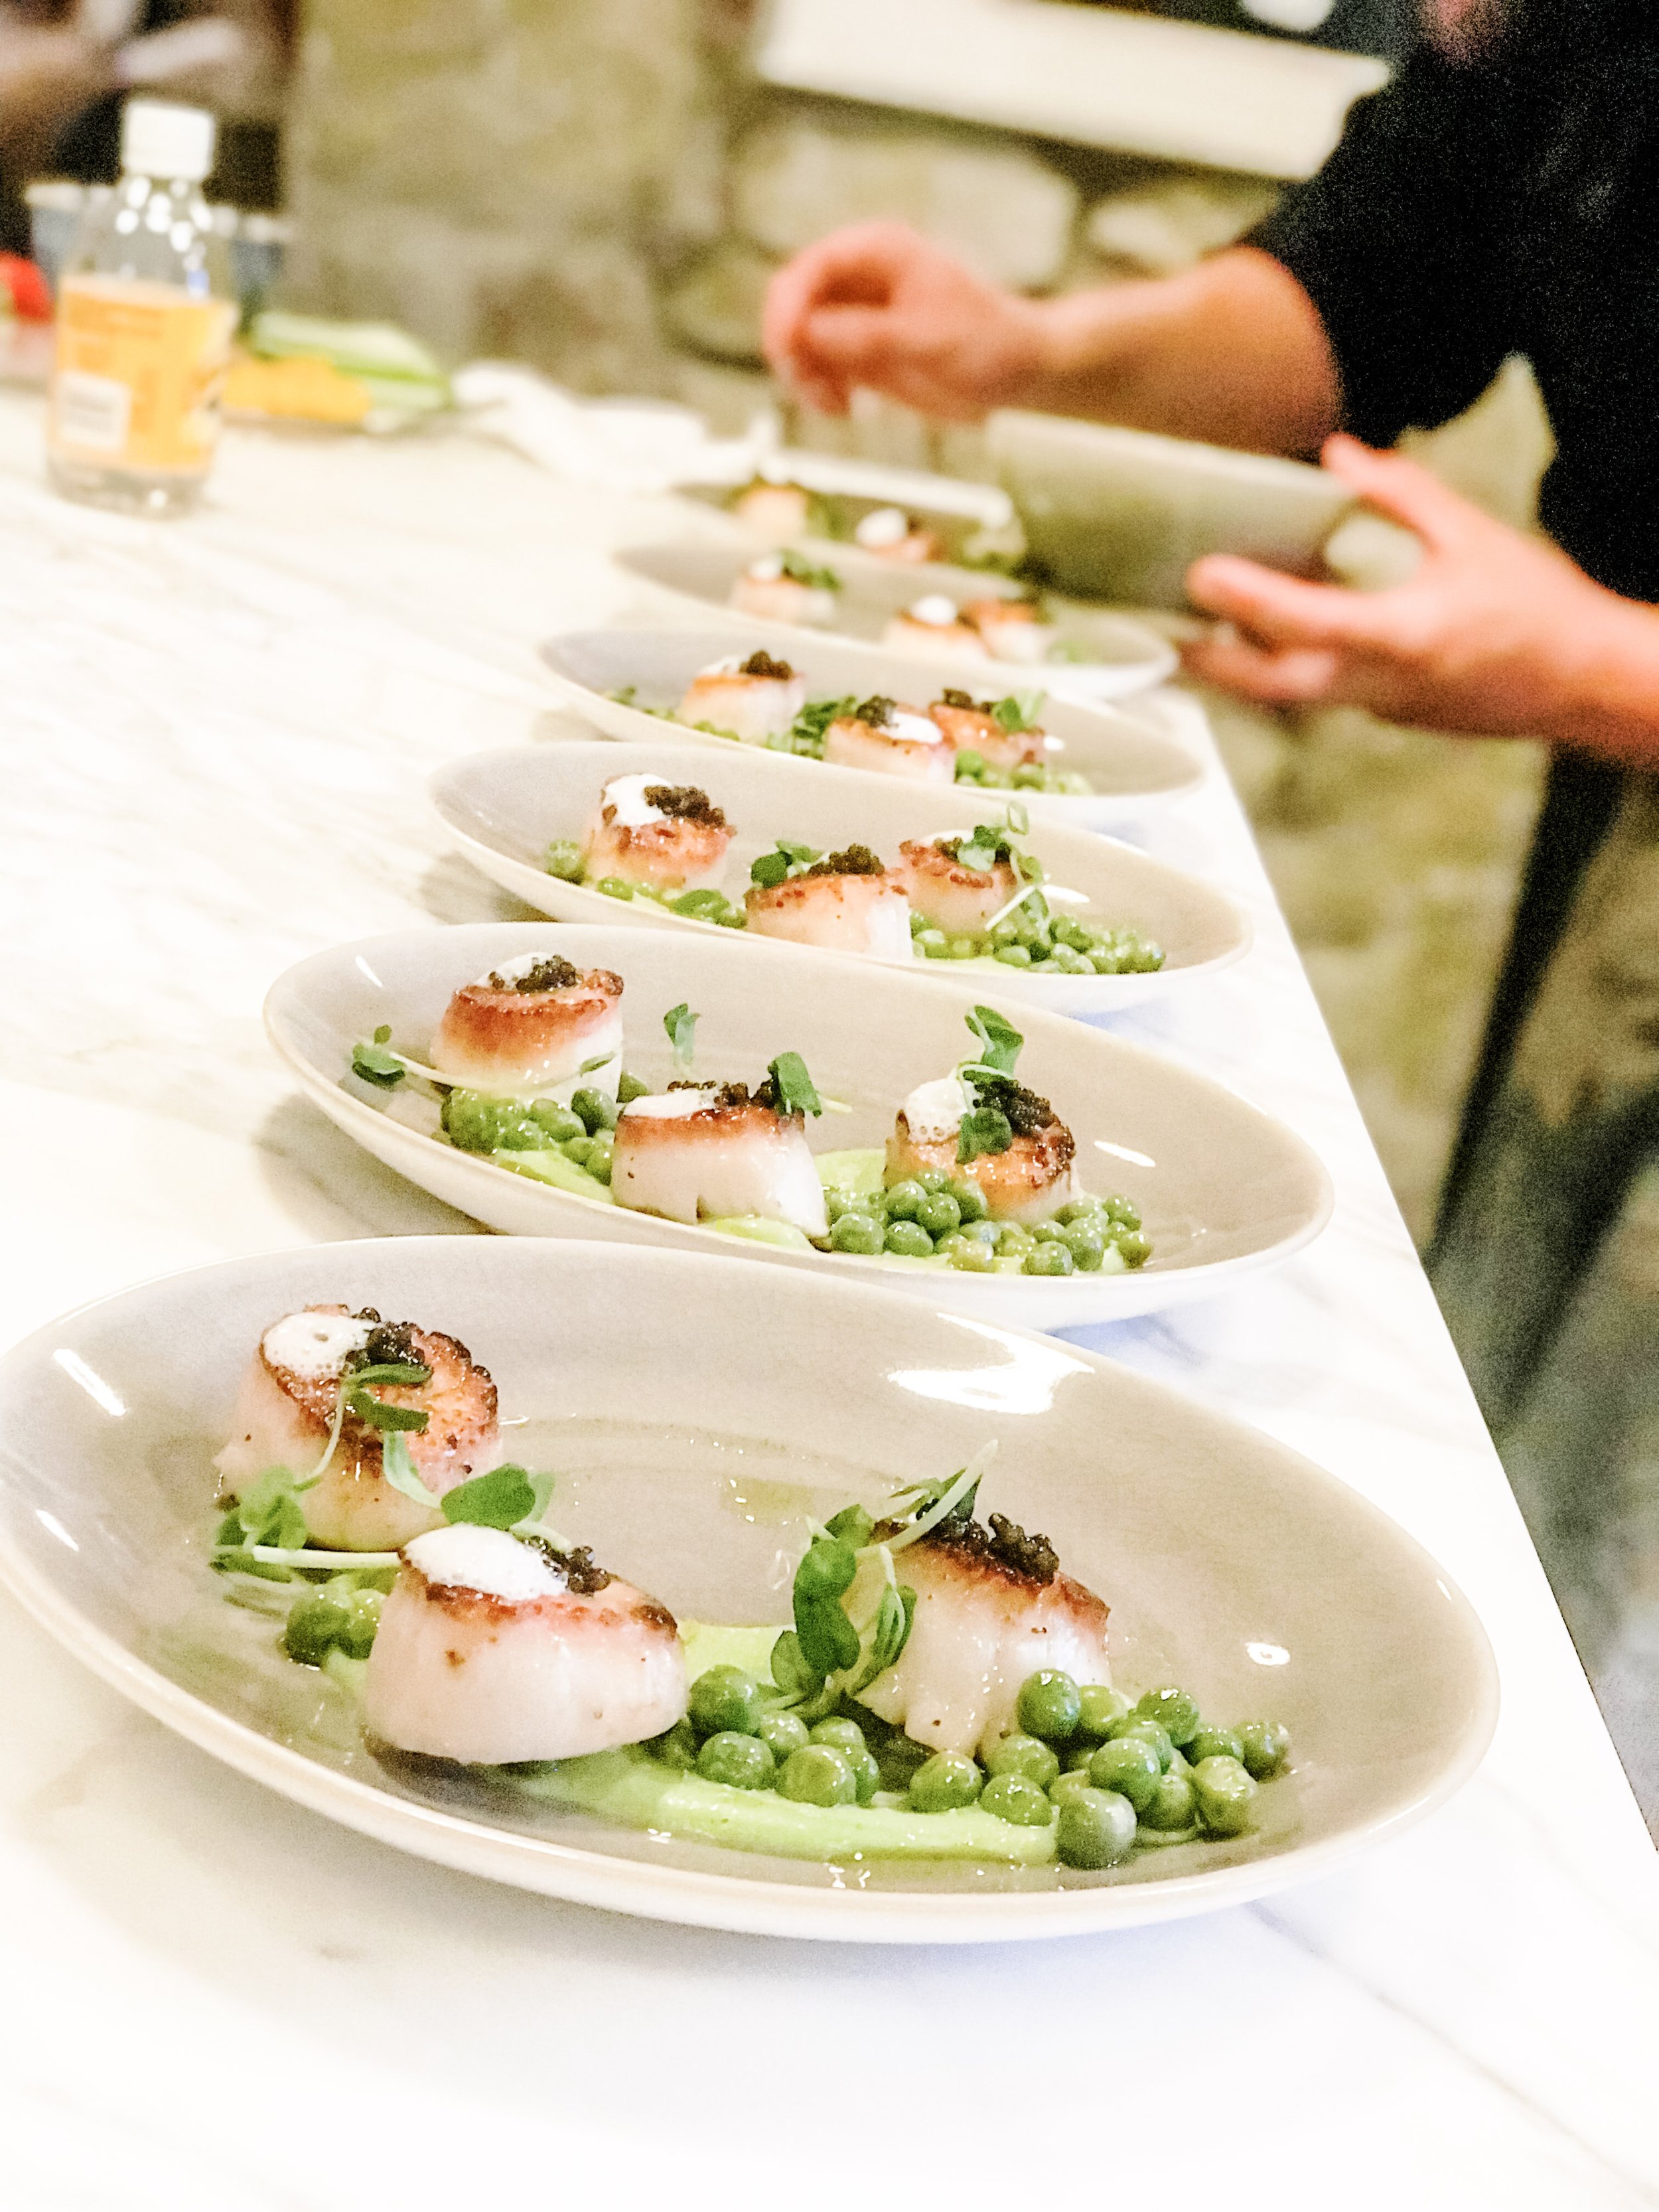 ret Patent Svig 2022 CT Catering Guide: 18 Caterers For Your Next Event — CT Bites